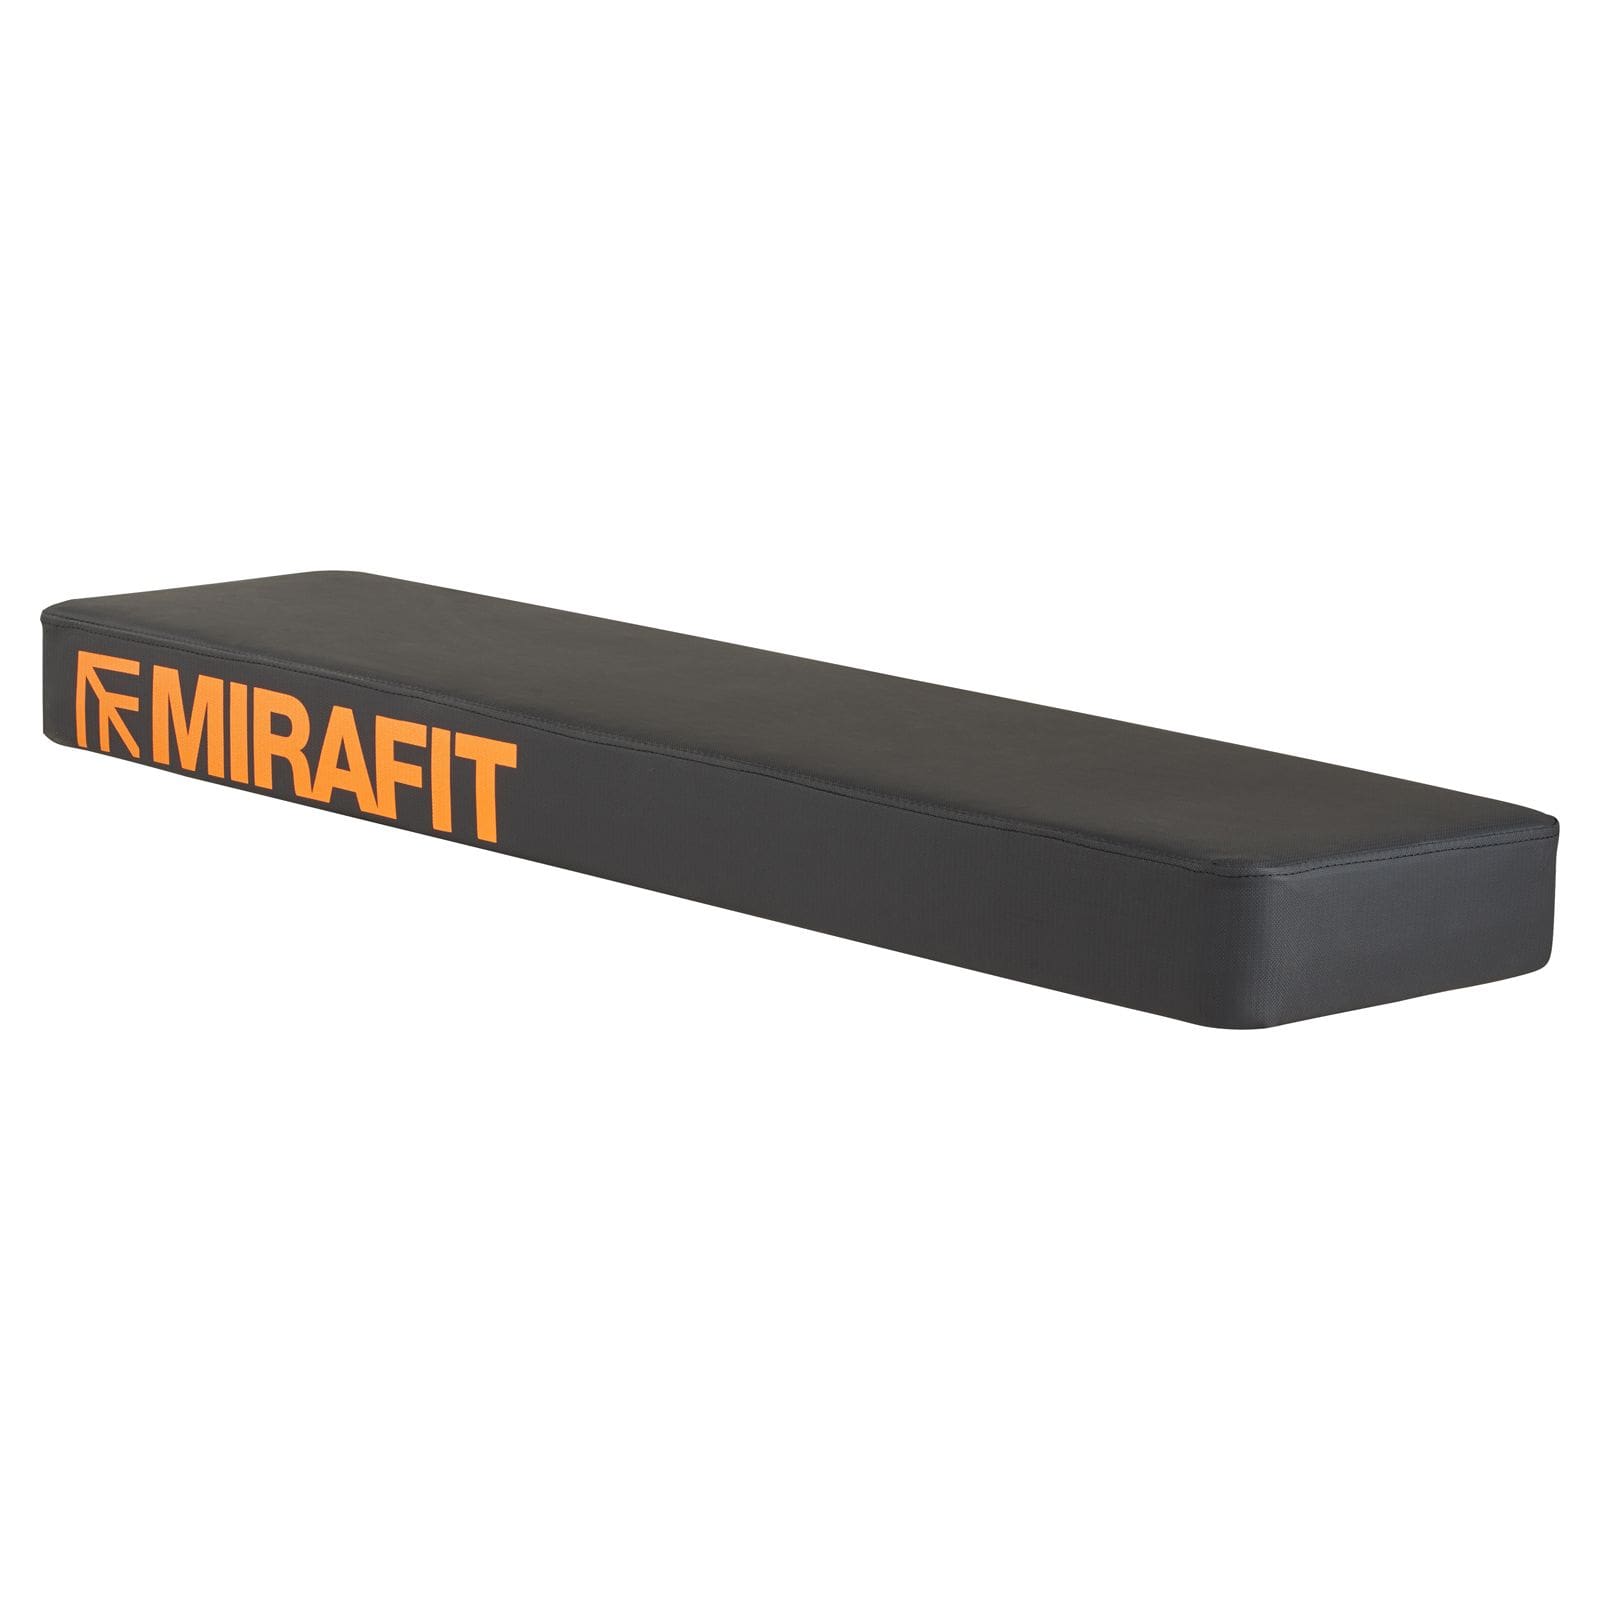 MIRAFIT M3 FLAT WEIGHT BENCH - Padded Top Review